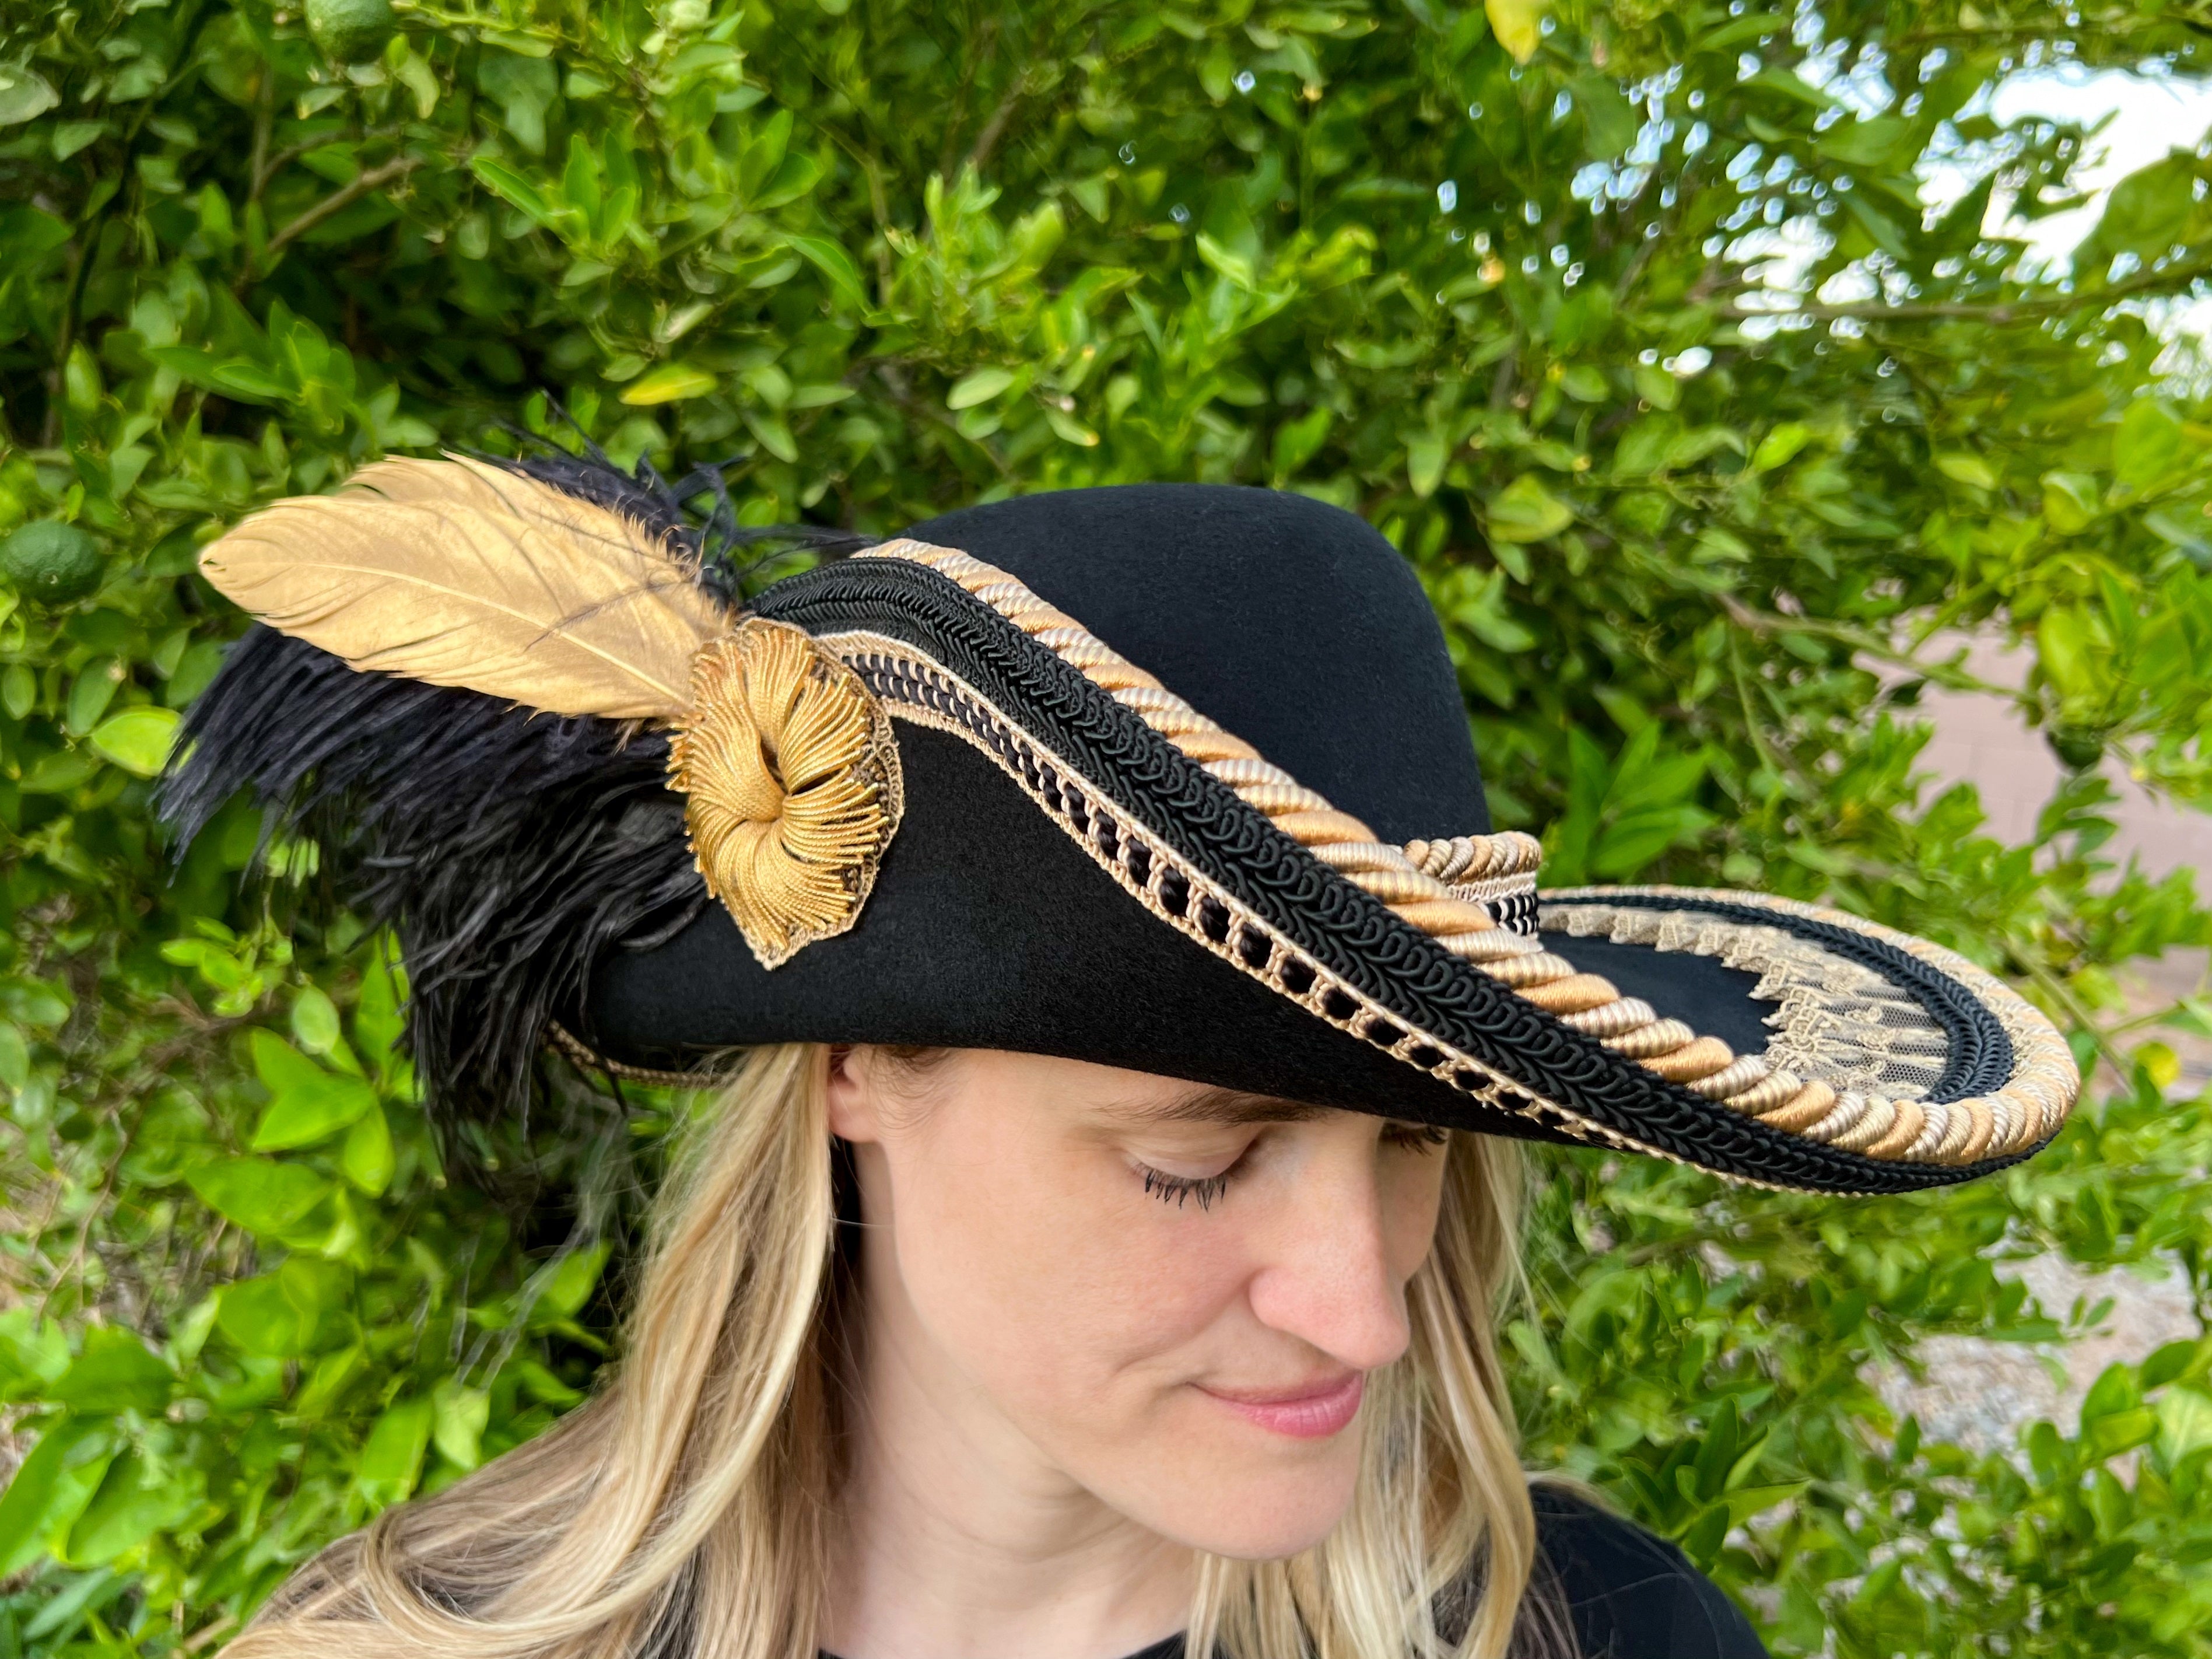 Cavalier Hat 21.75 Black Wool Base with Baby Blue Trim, Feathers